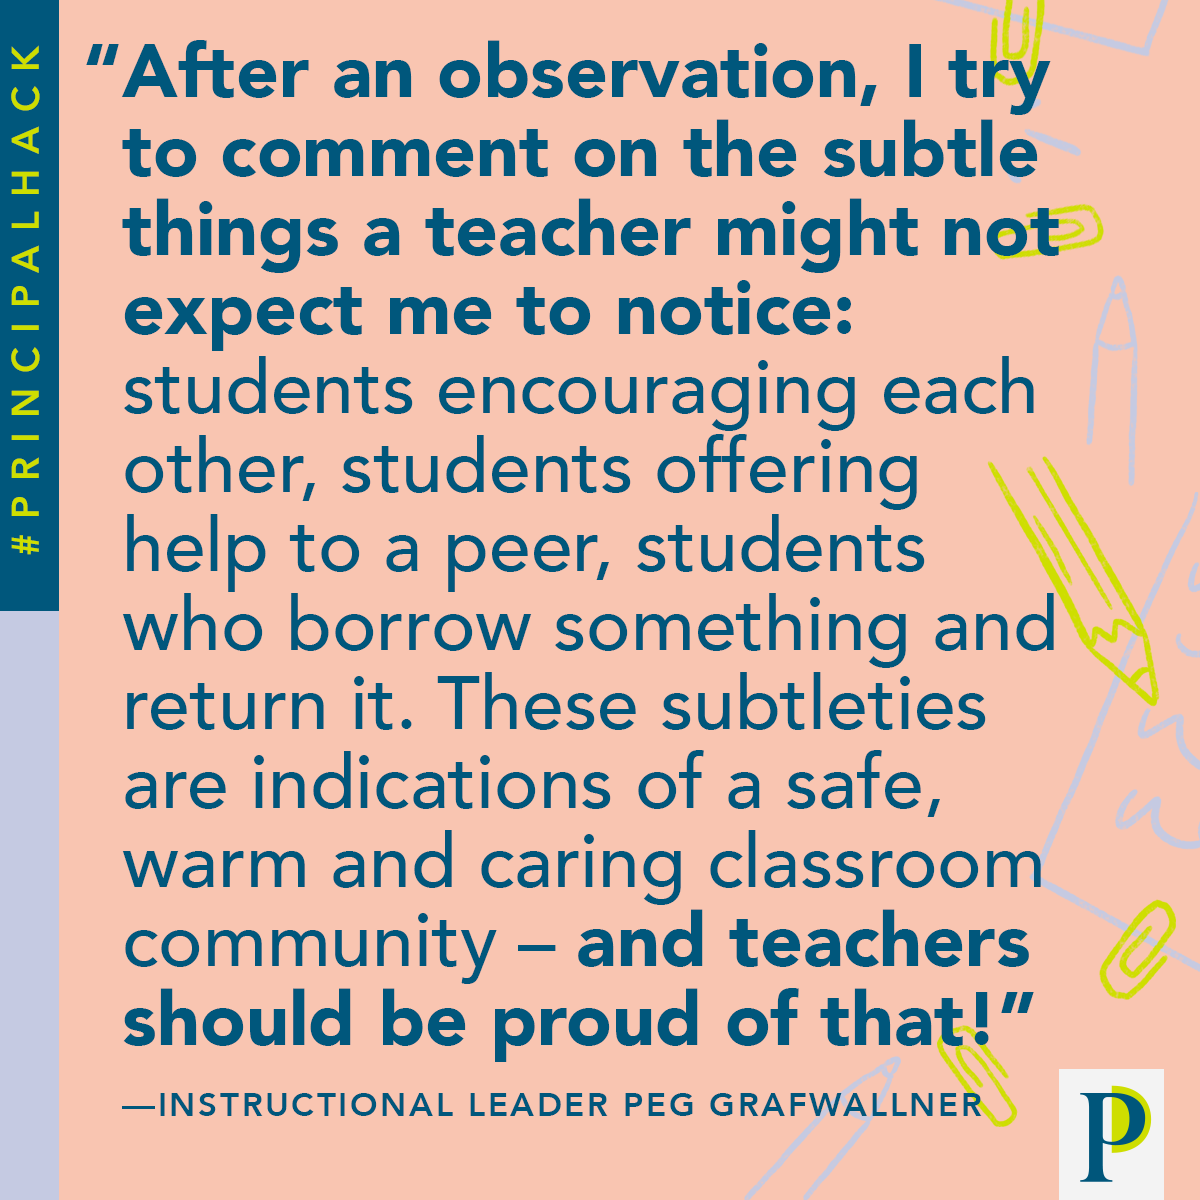 What you notice can signal what you value. (Feedback #PrincipalHack via instructional leader @PegGrafwallner)